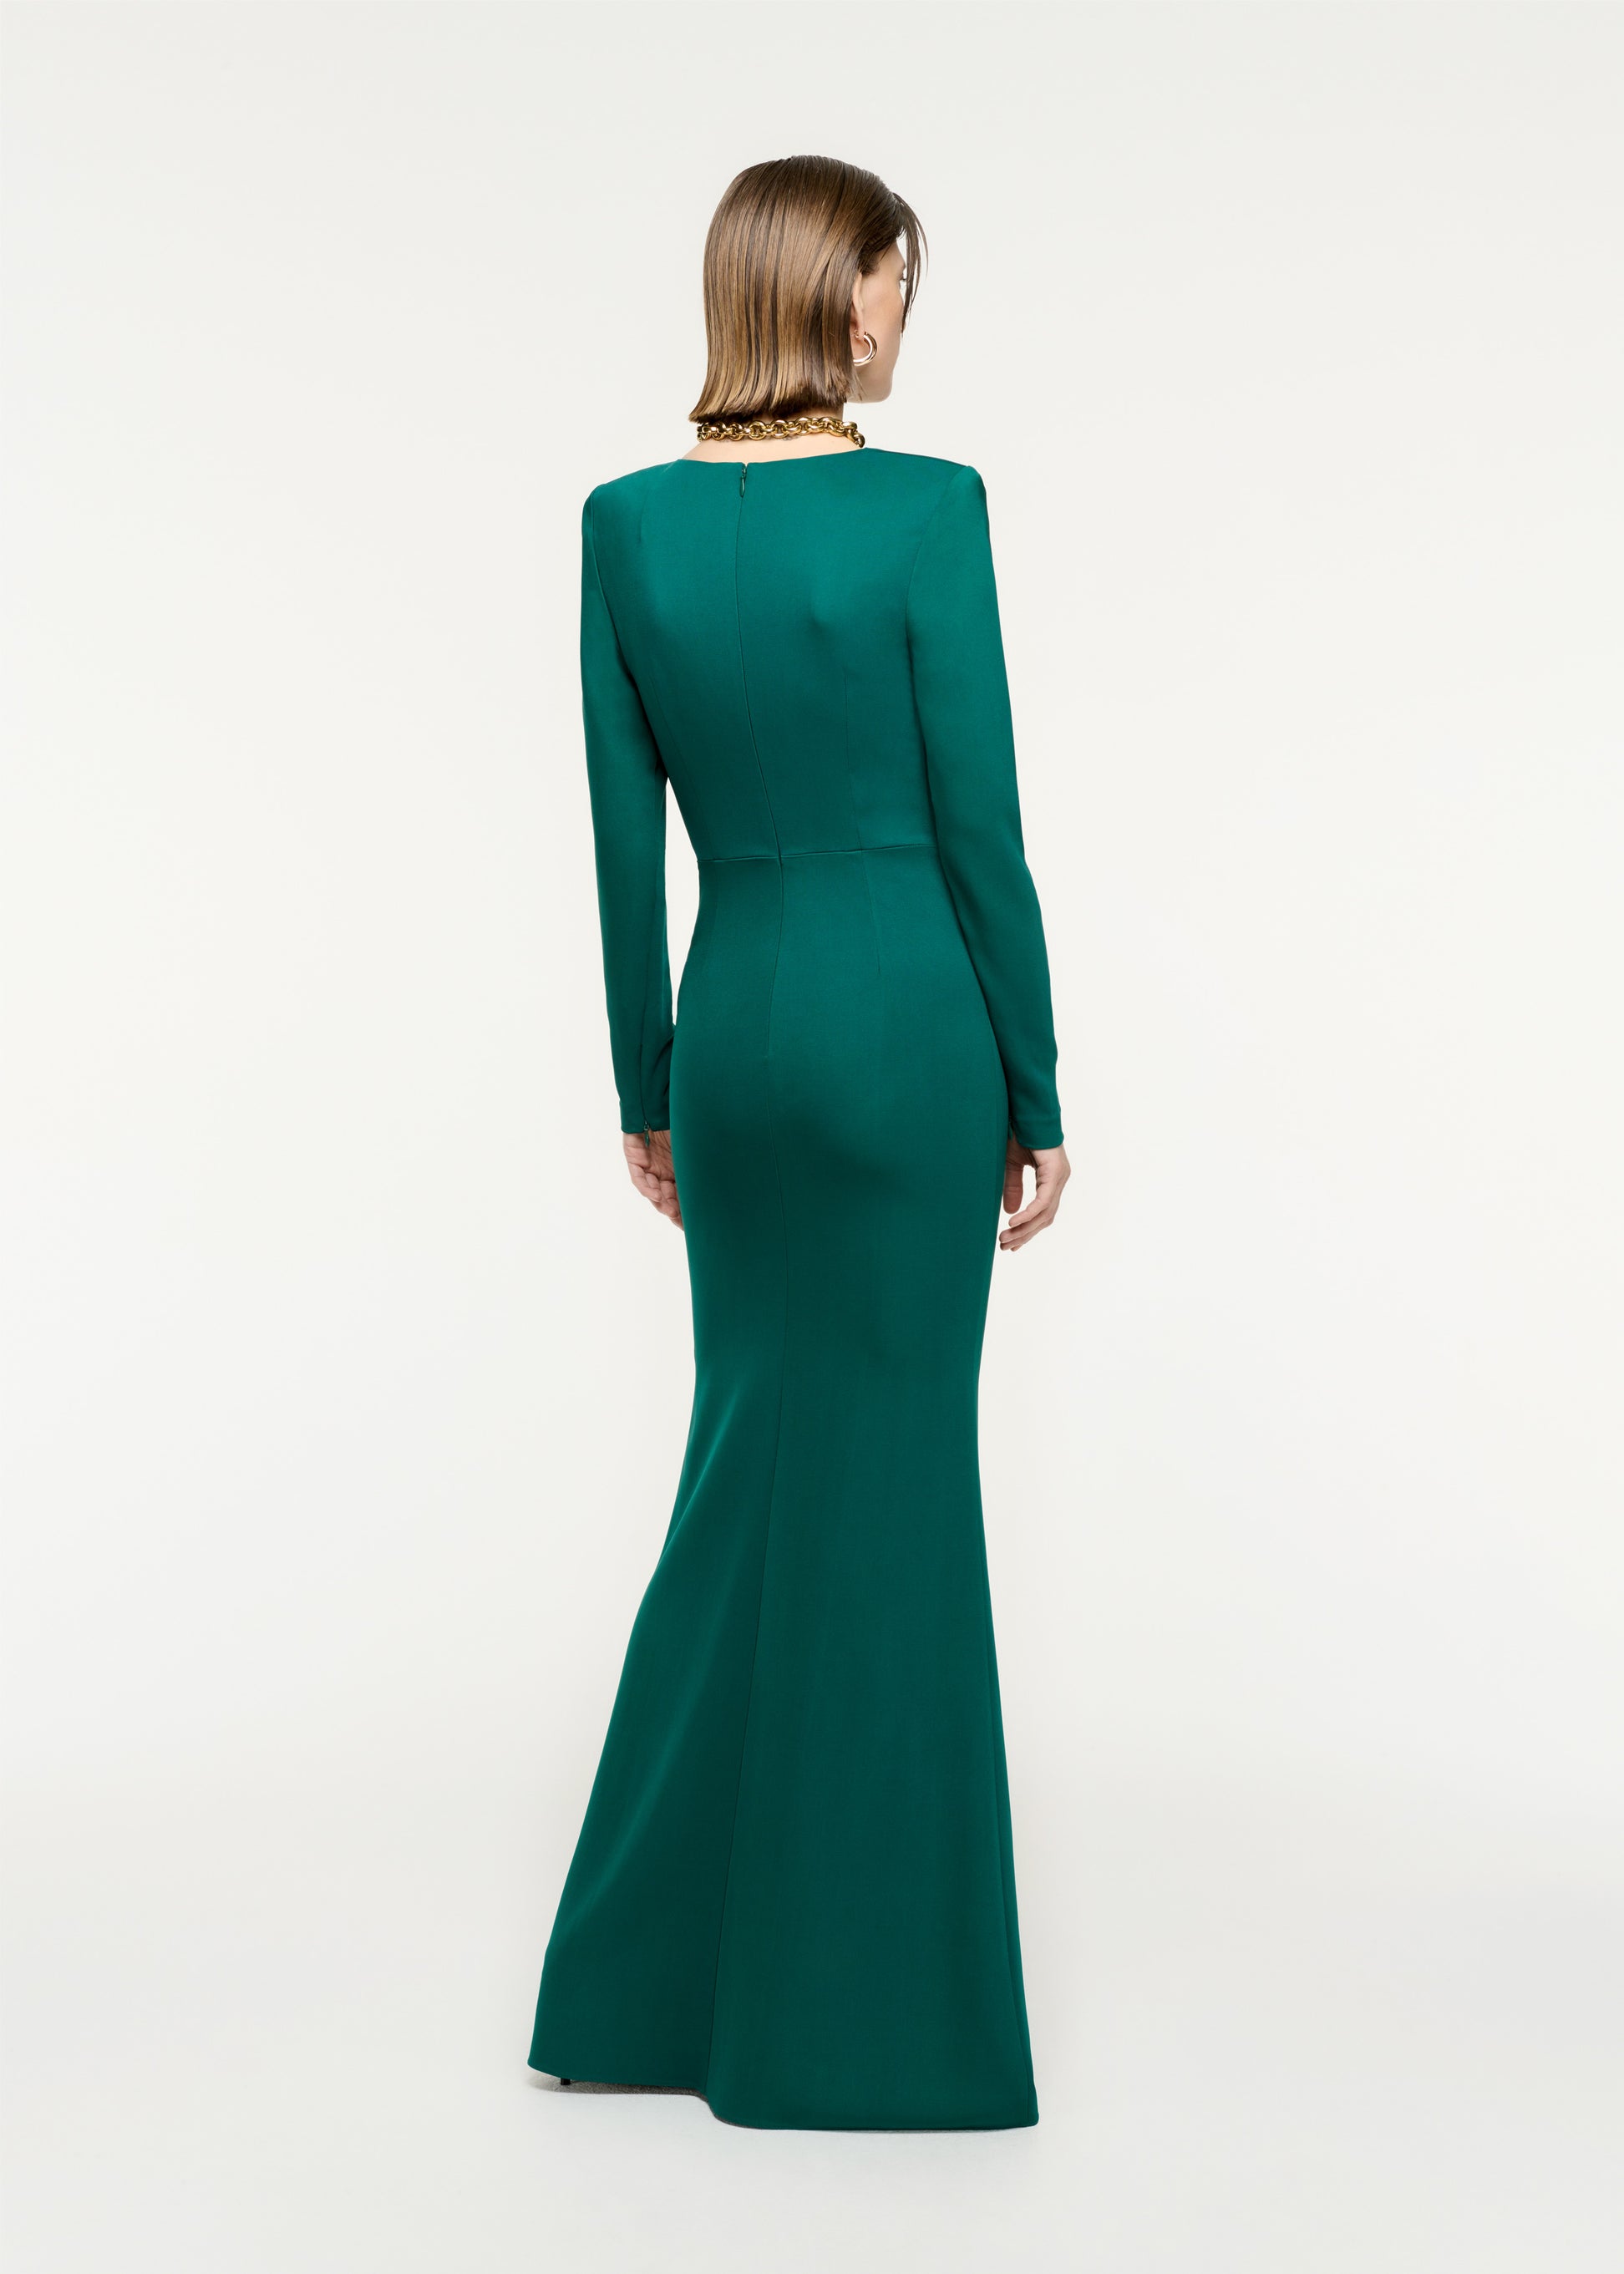 The back of a woman wearing the Long Sleeve Stretch Cady Maxi Dress in Green